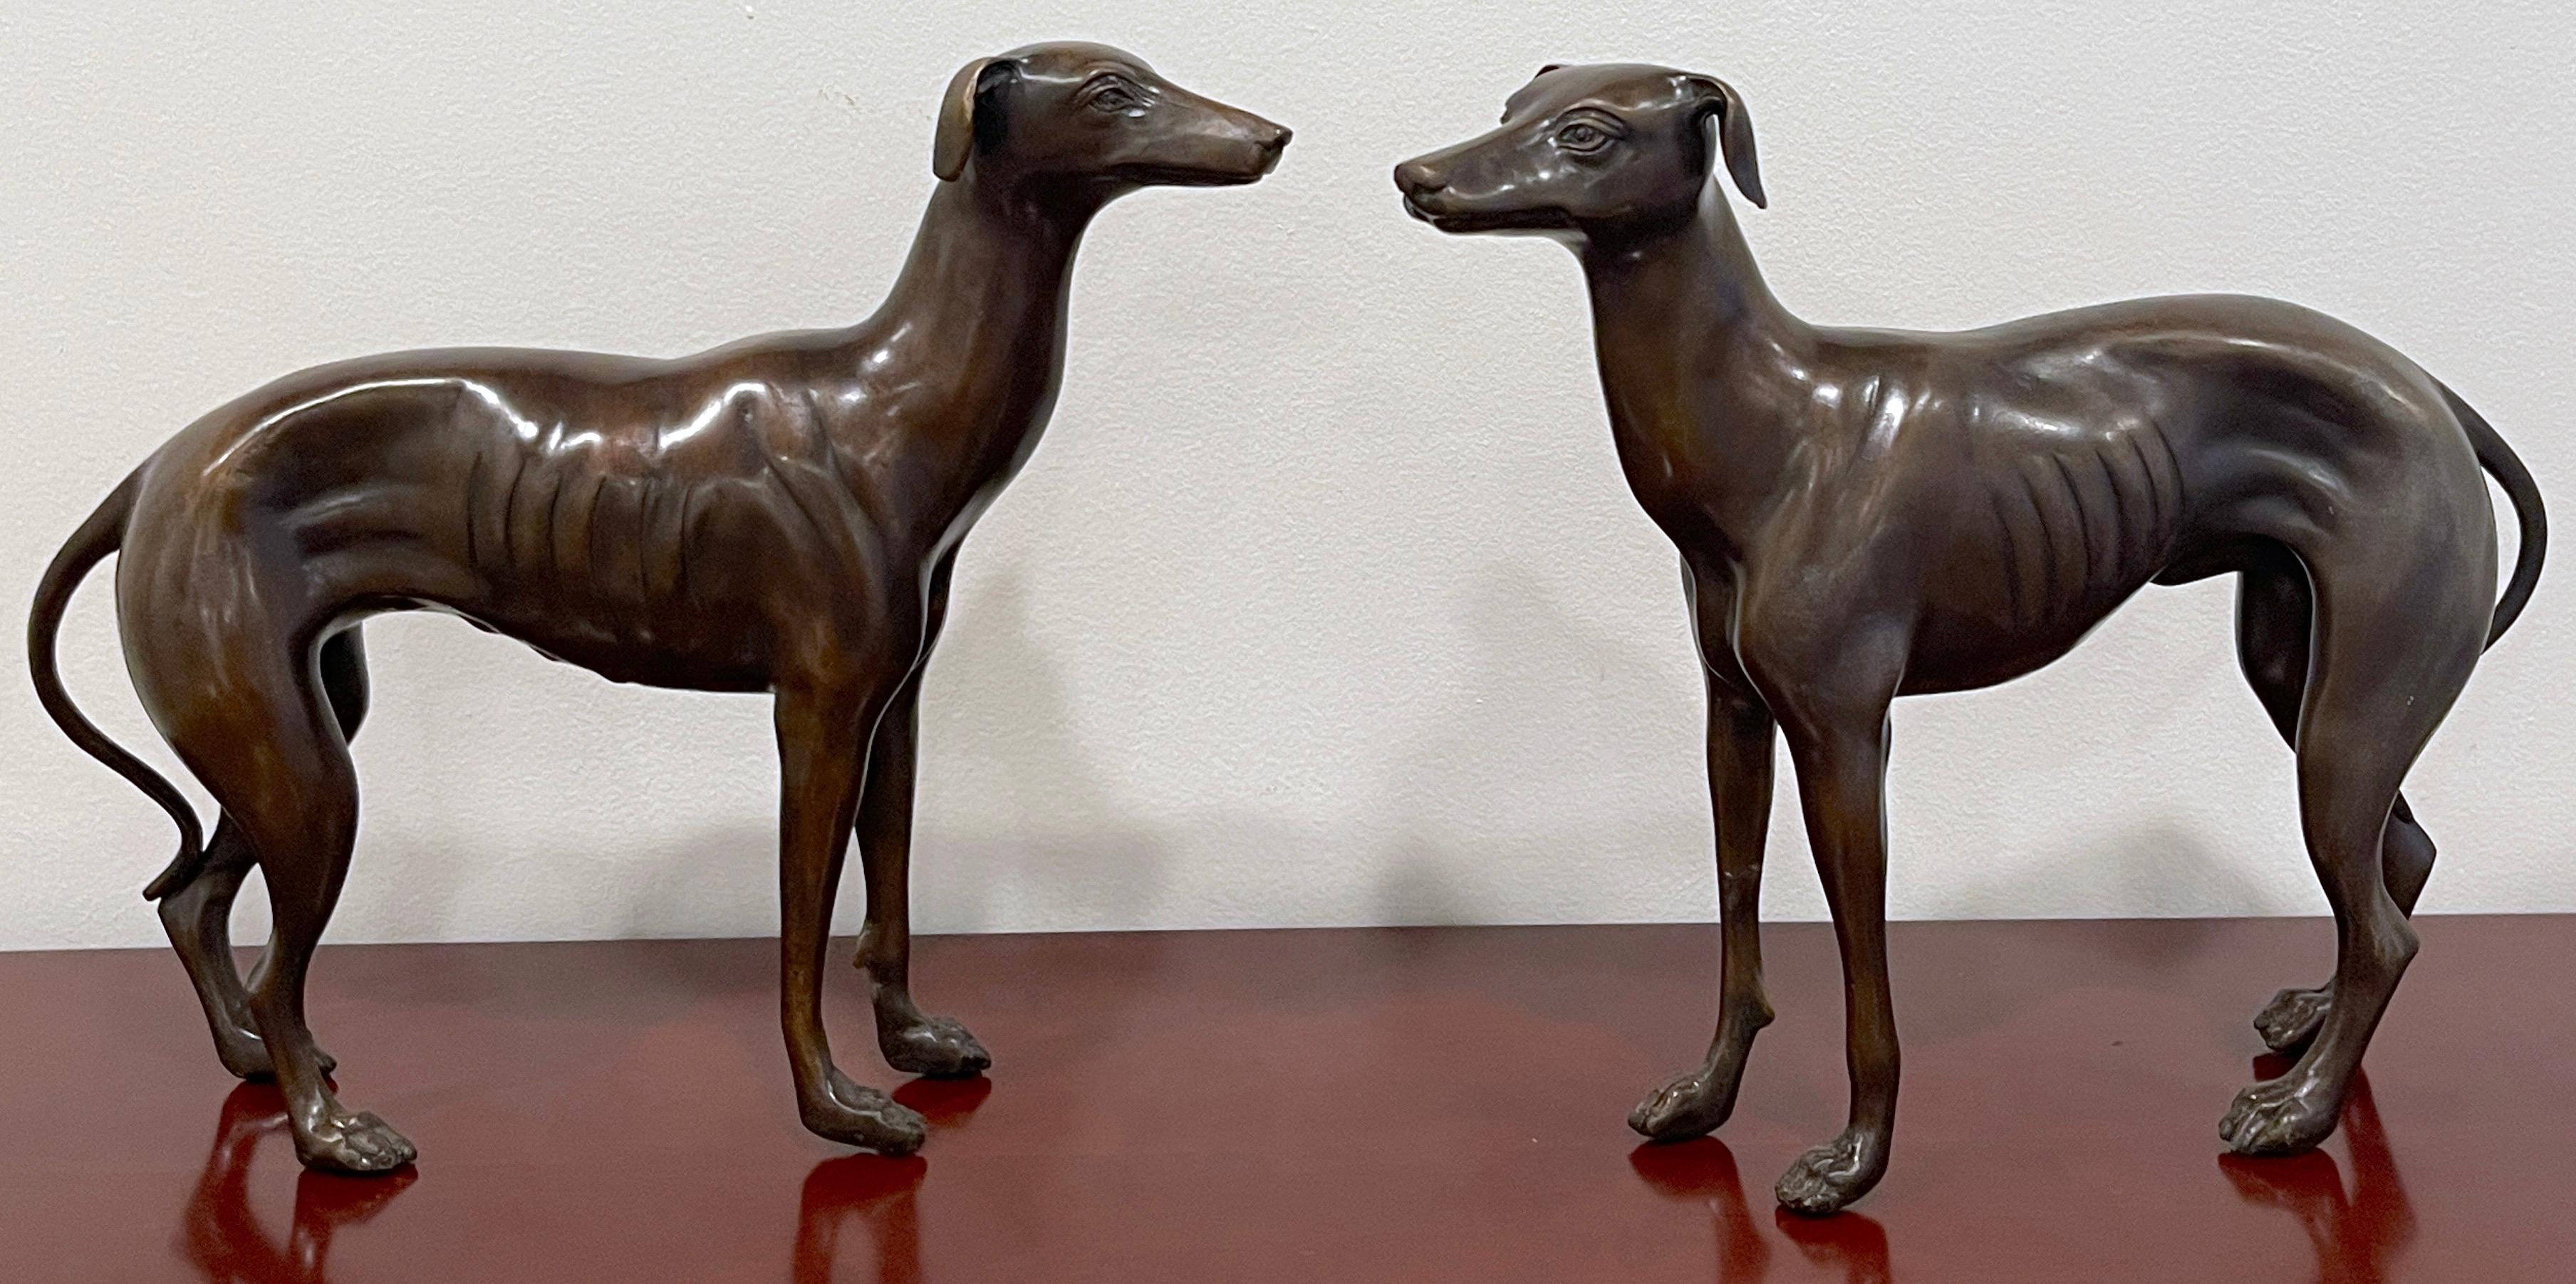 A pair of French patinated bronze models of whippets
France, 1960s
A rare find, each one realistically cast and modeled, a true pair, the female facing right, the male facing left. Showing influences of the French sculptor Pierre Jules Mene